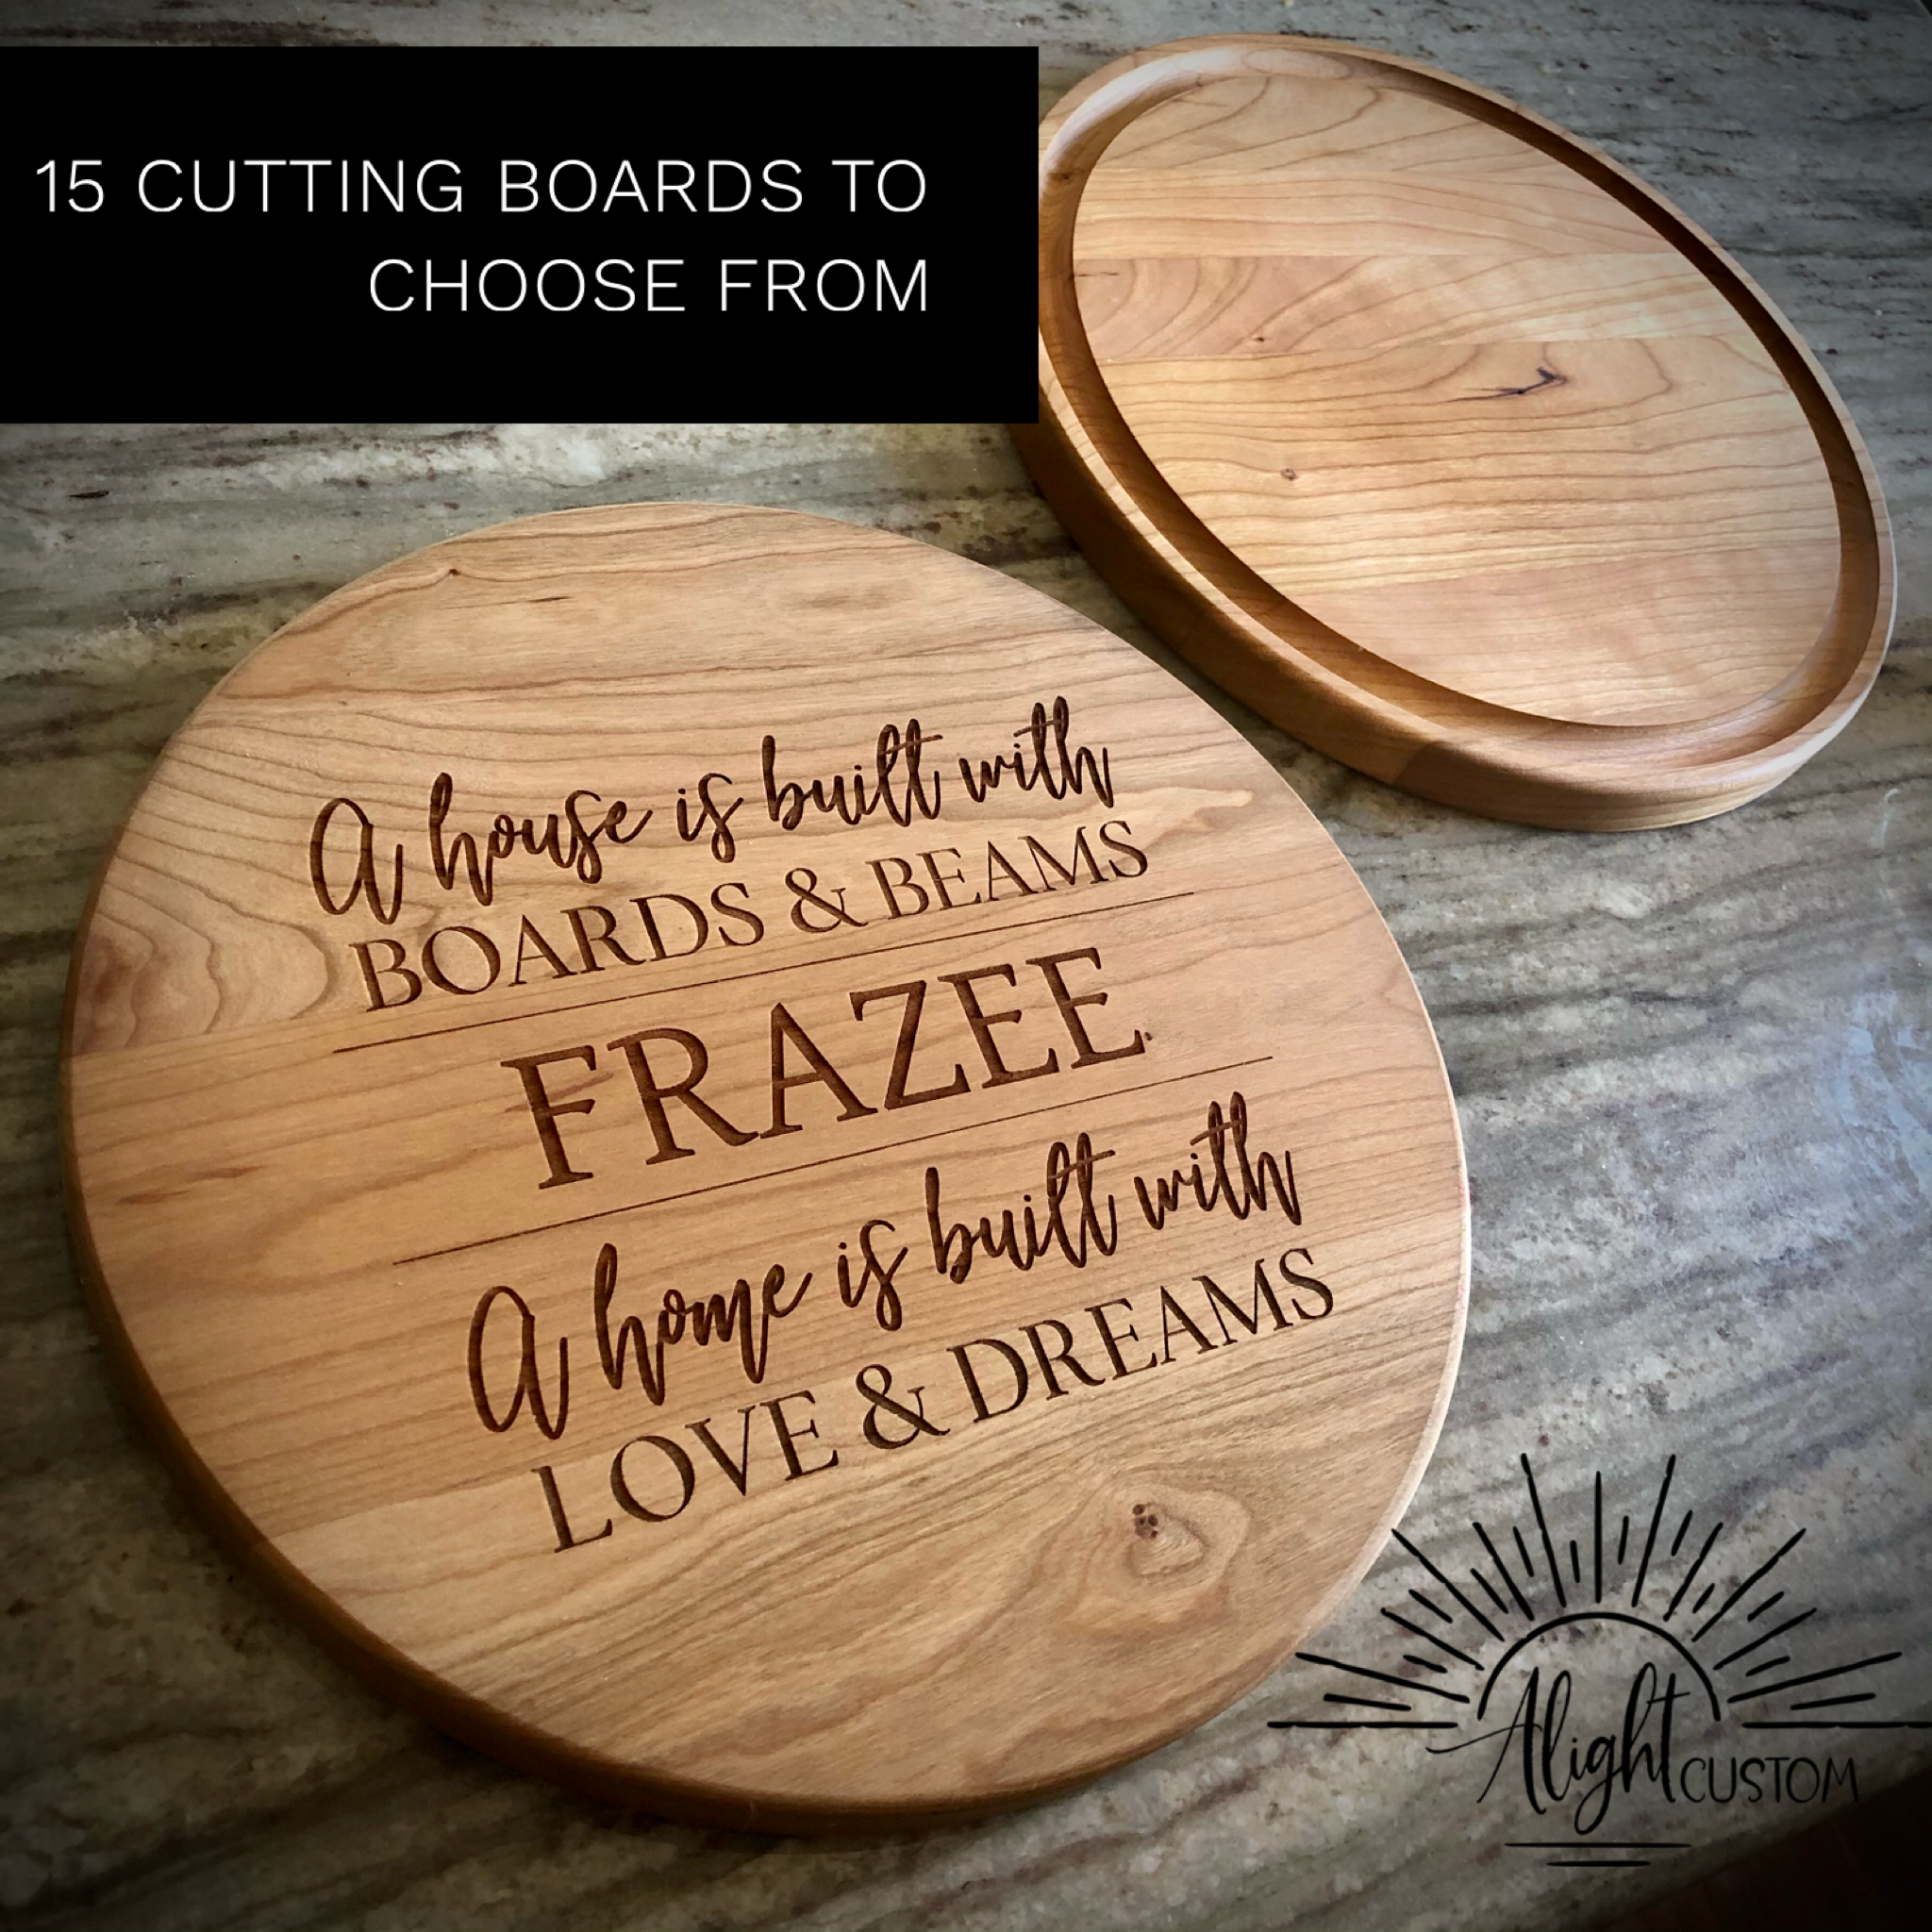 How to Choose a Cutting Board